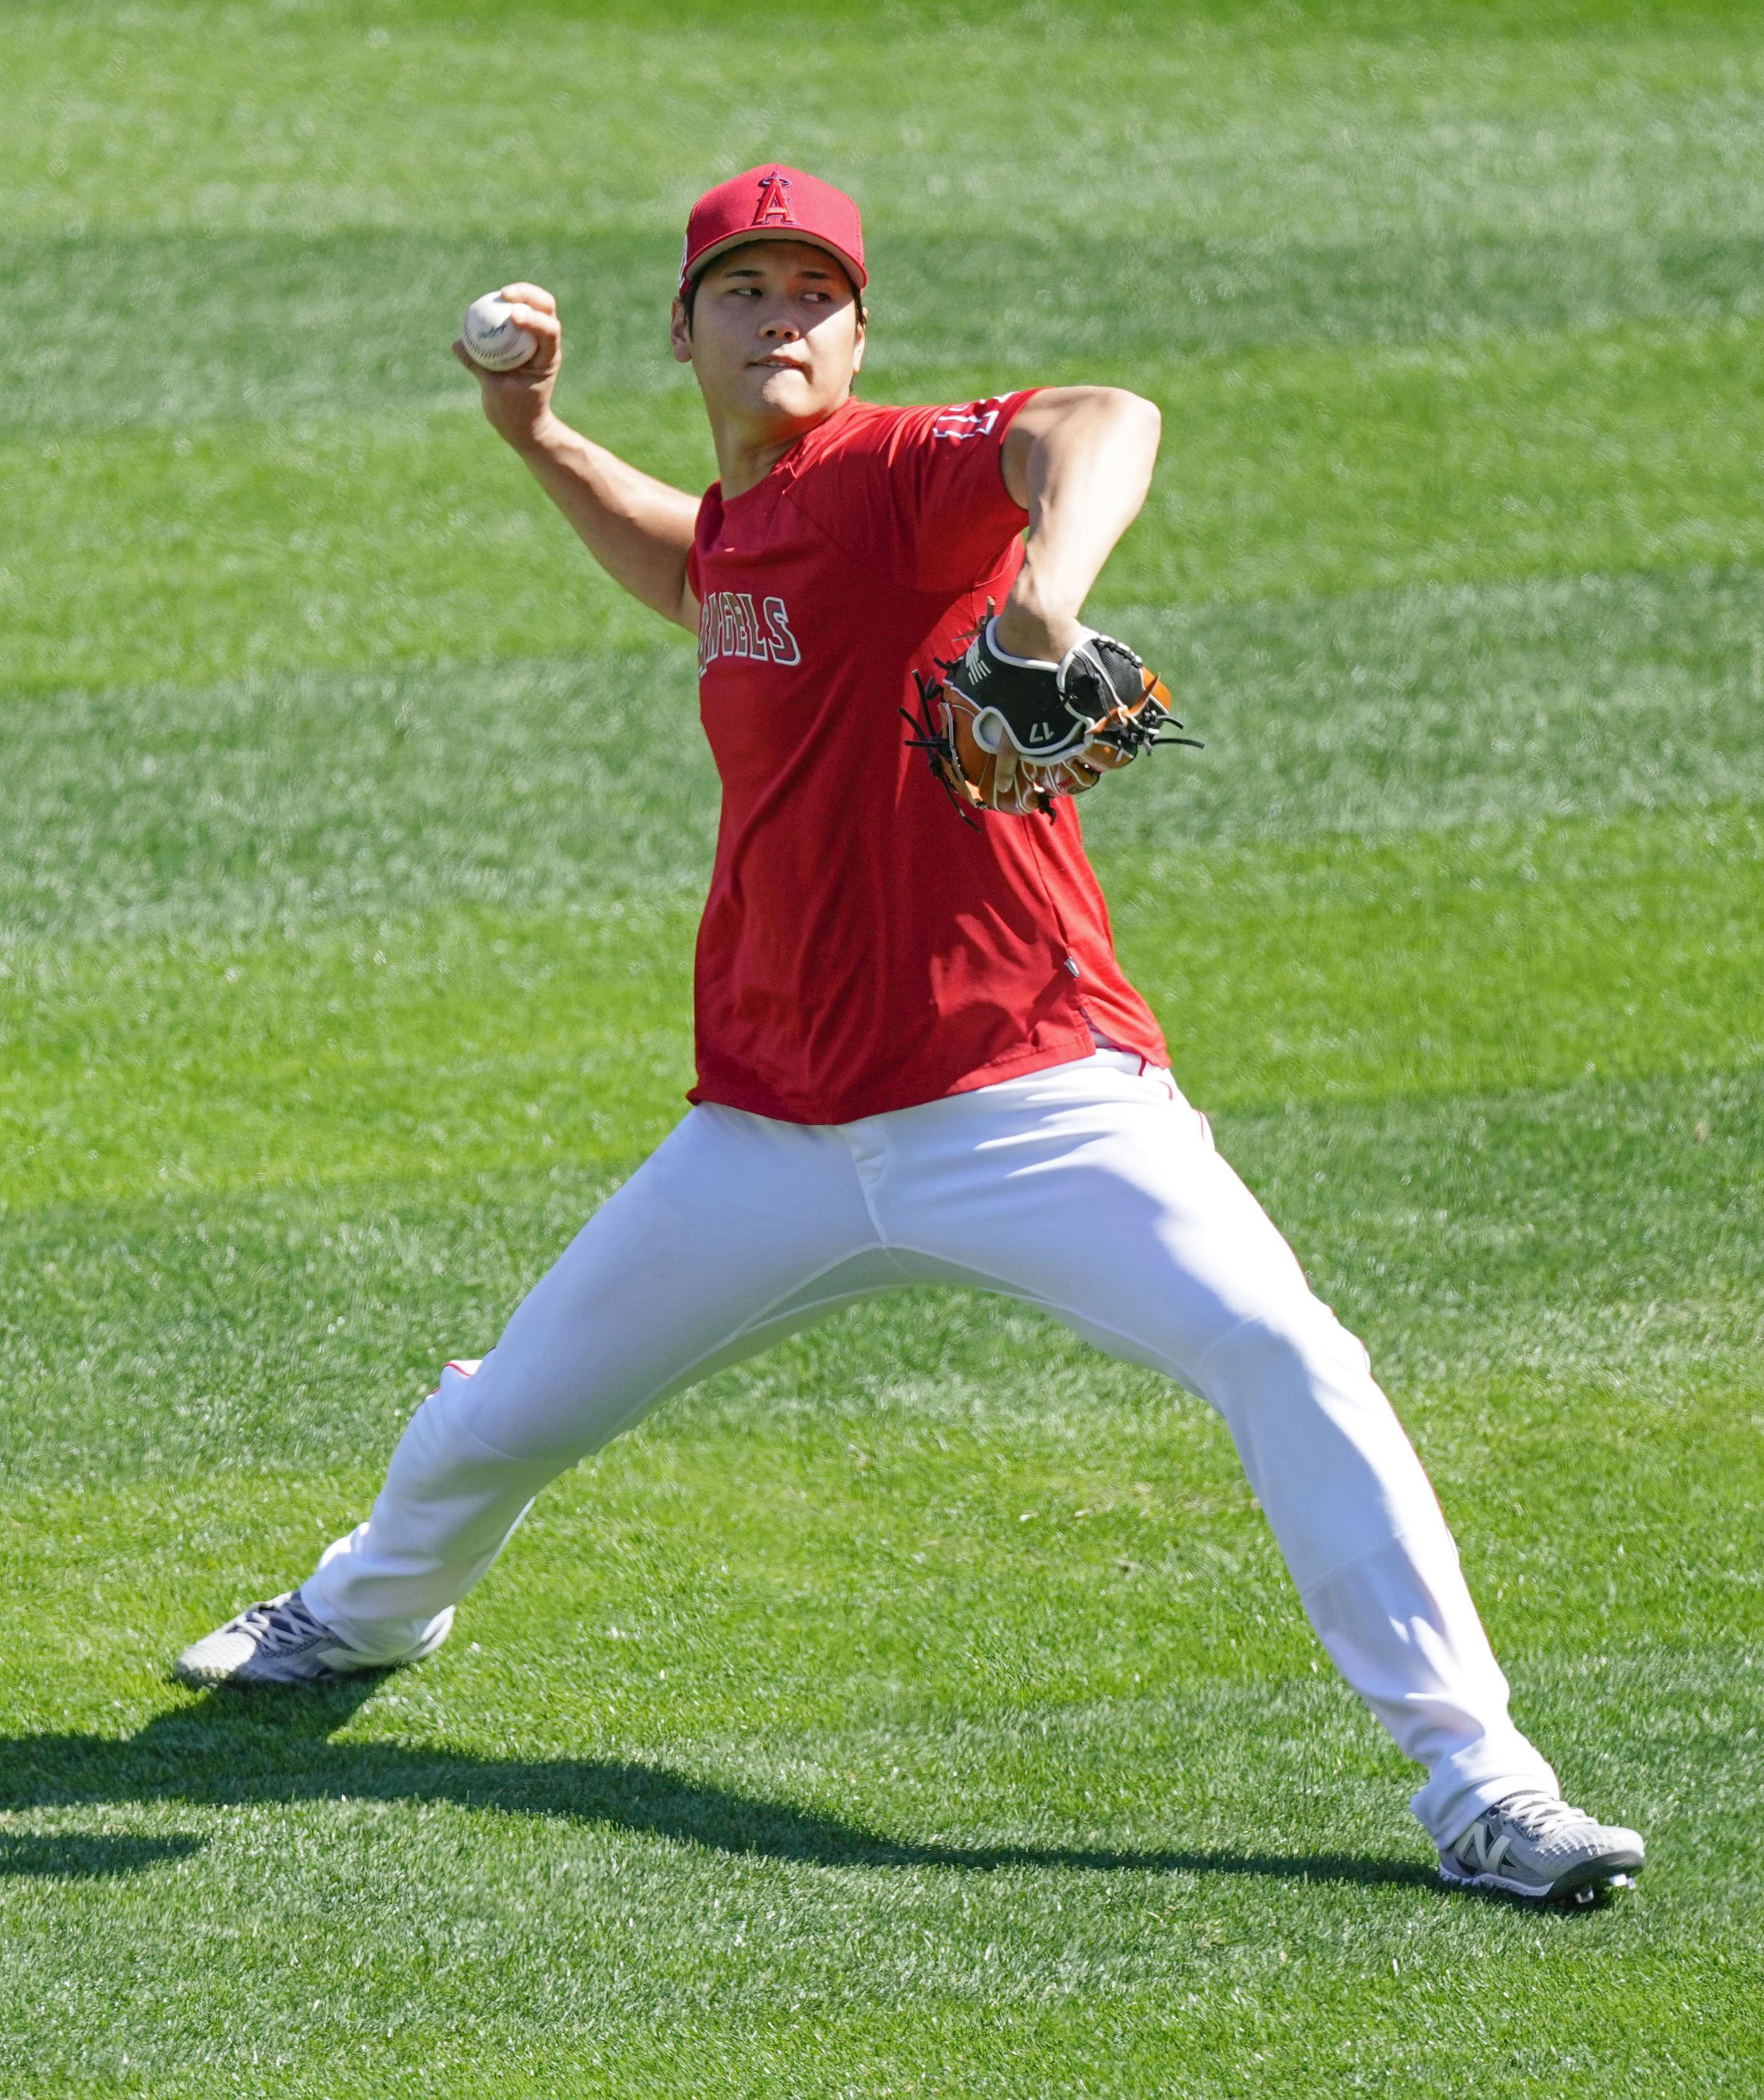 Shohei Ohtani of the Los Angeles Angels throws in practice ahead of the MLB Spring Training game against the Los Angeles Dodgers in Anaheim, California, March 28, 2023. /CFP